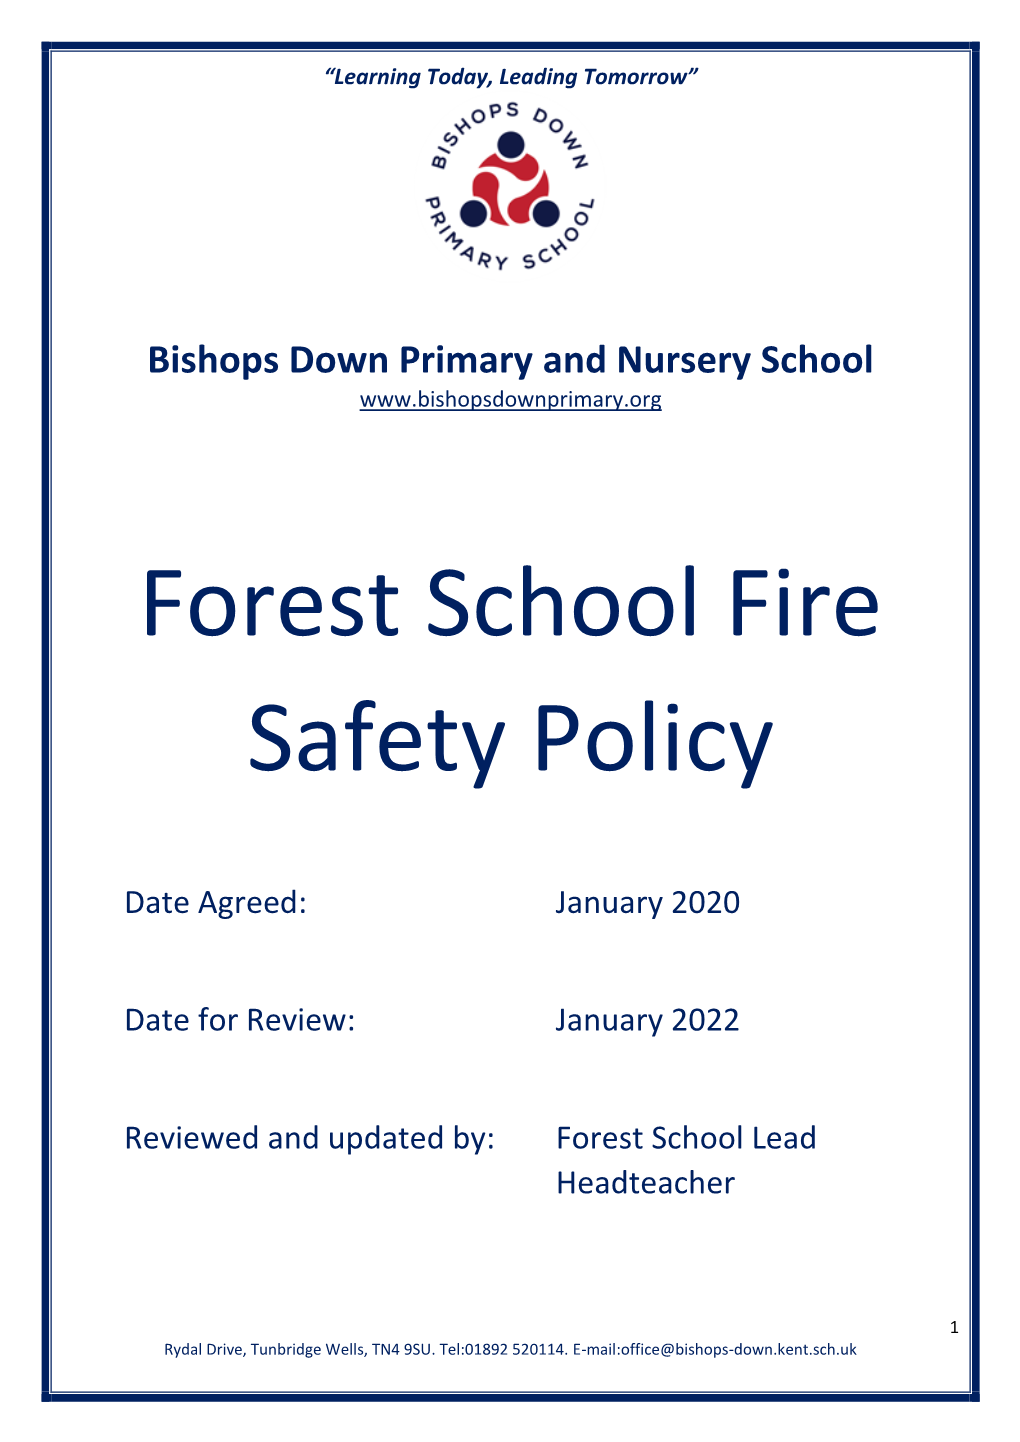 Forest School Fire Safety Policy